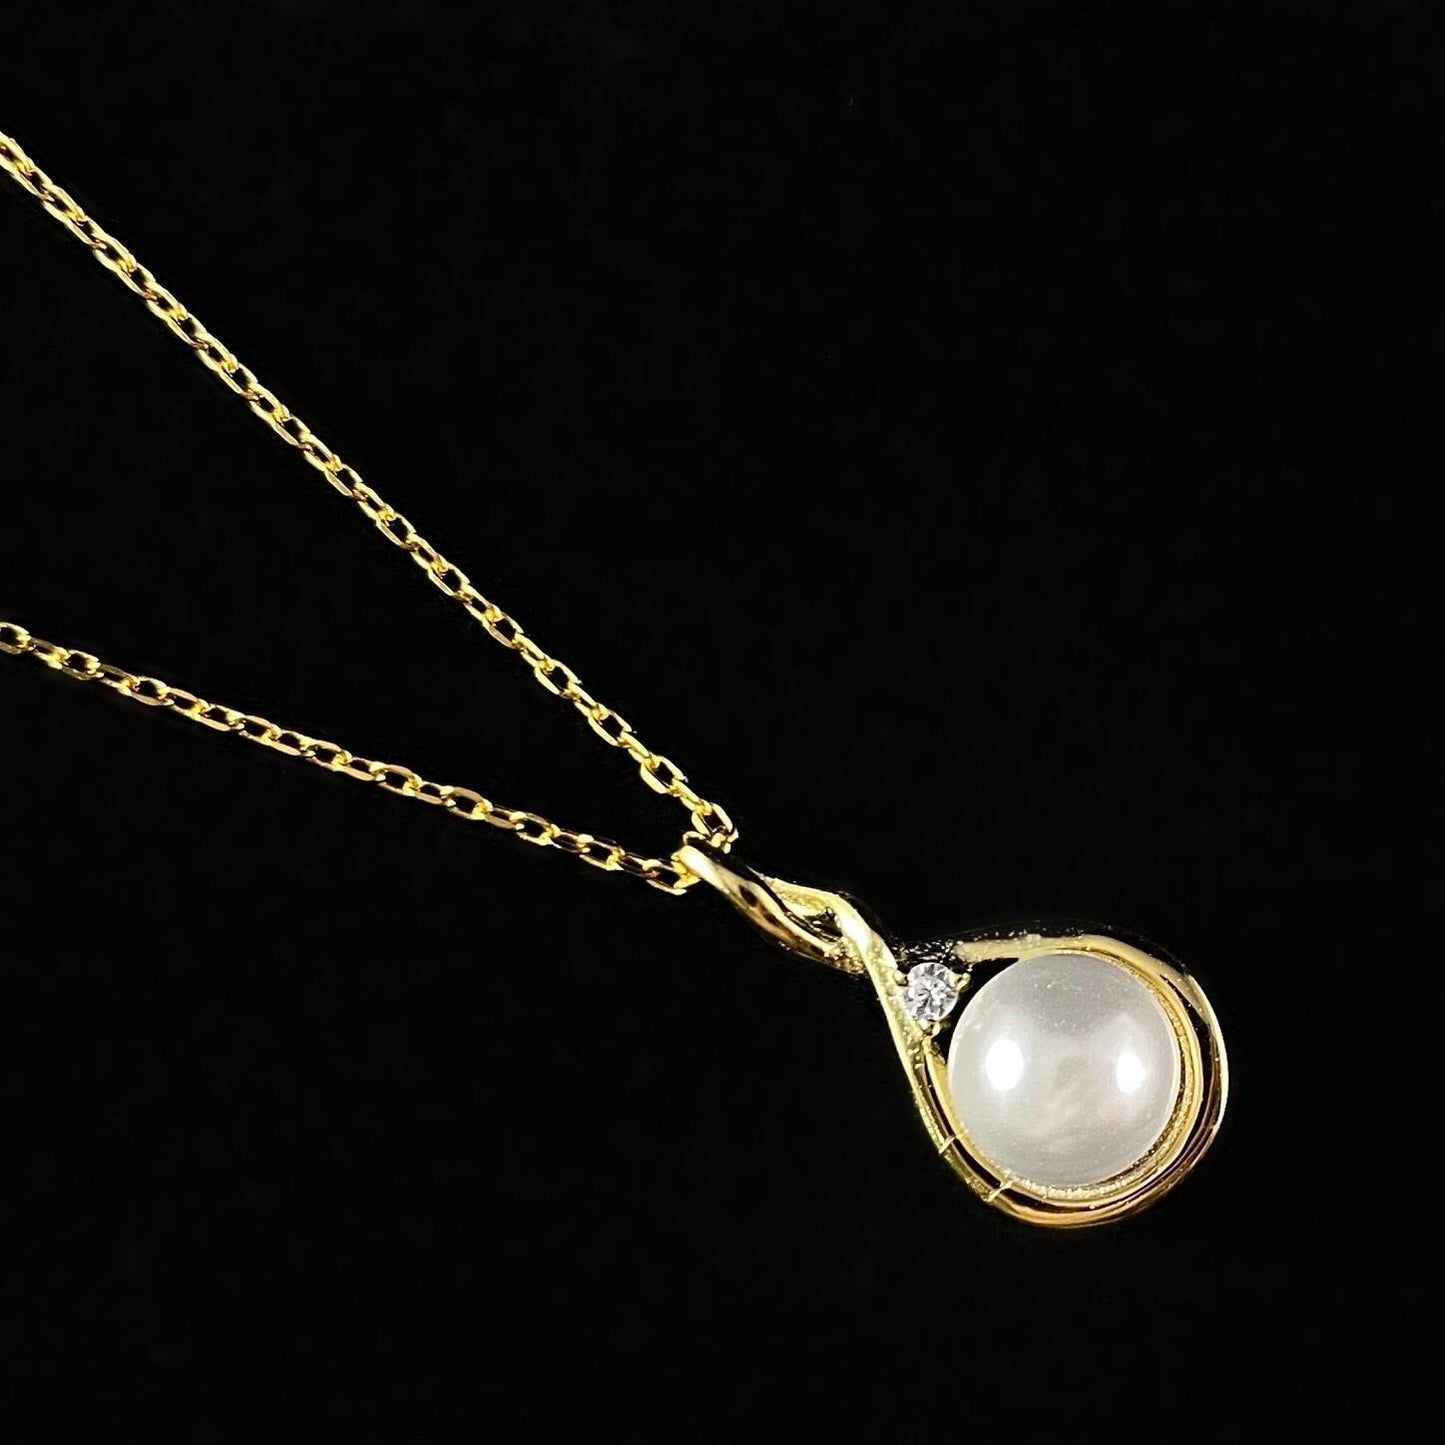 Elegant Dainty Gold Pendant Necklace with Round Clear Crystal and Faux Pearl - Genevive